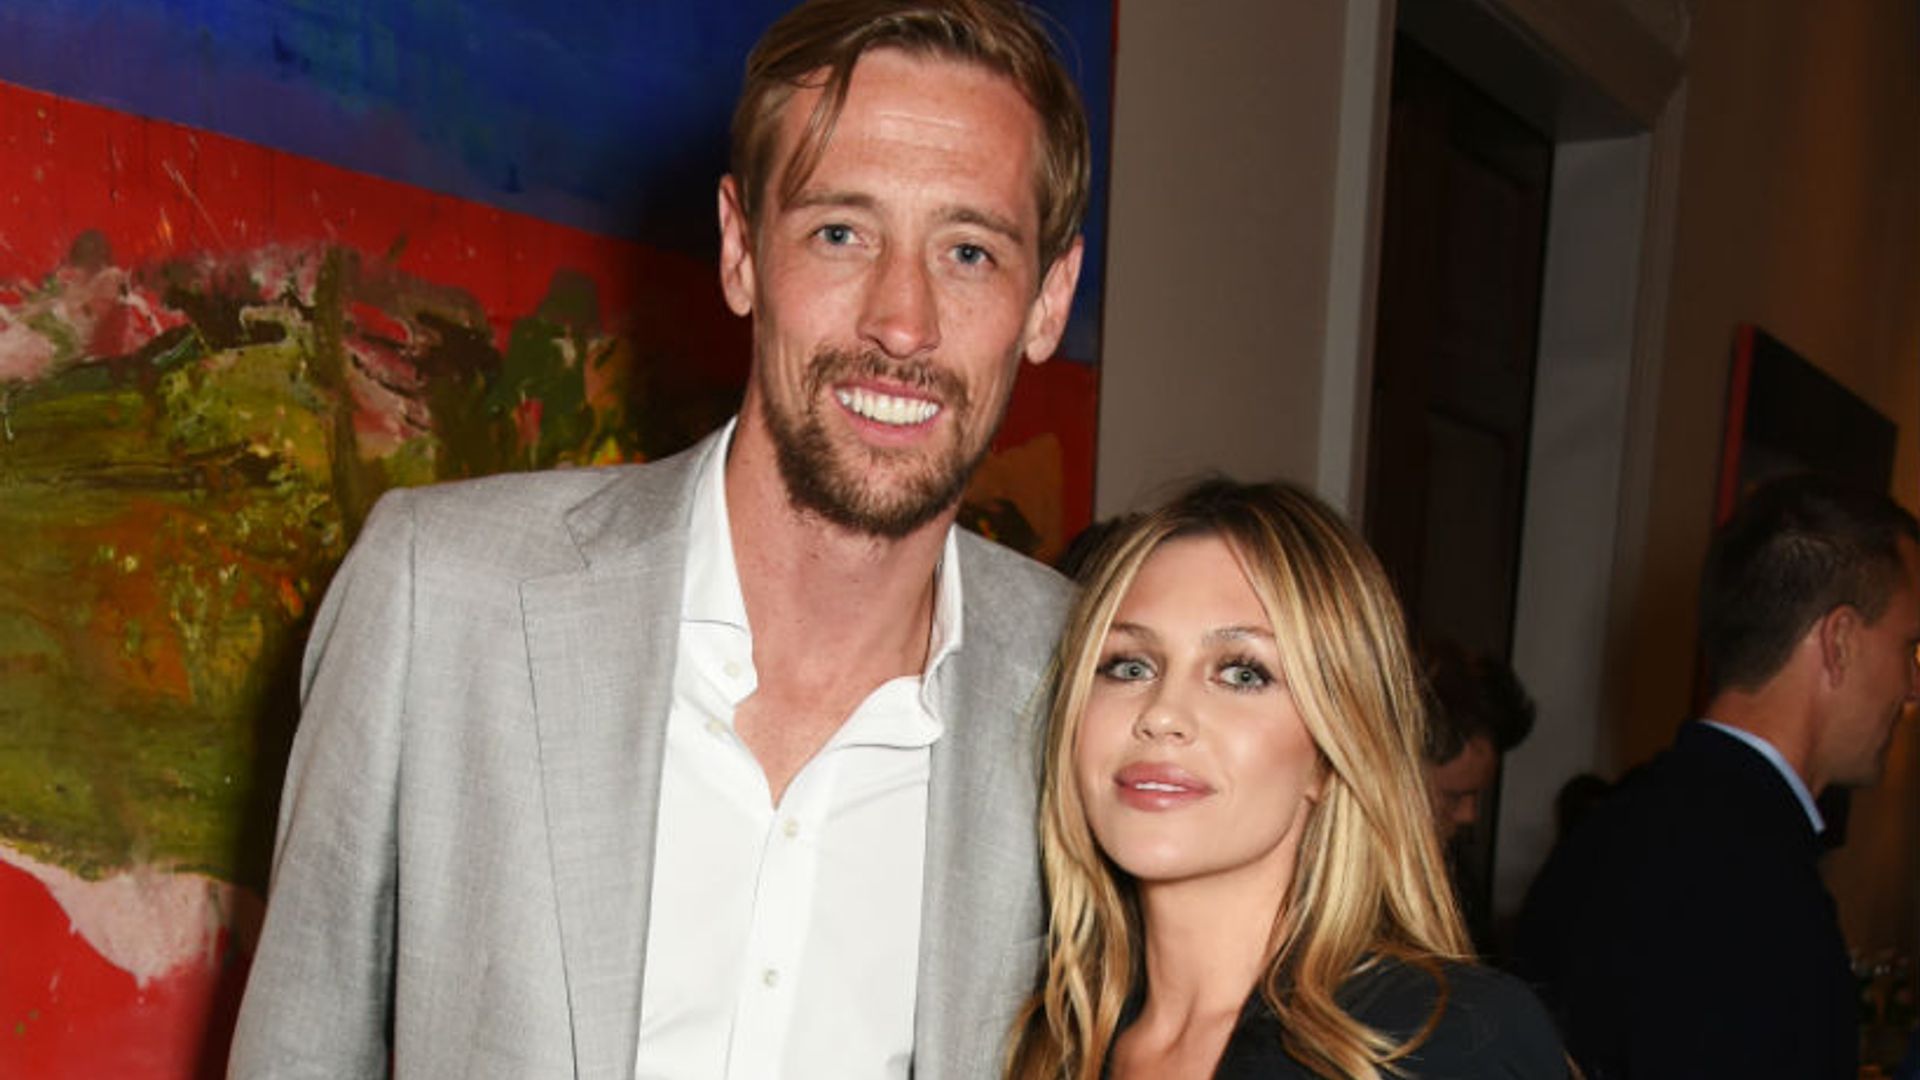 Peter Crouch is the 'best dad' as he bonds with baby son Johnny